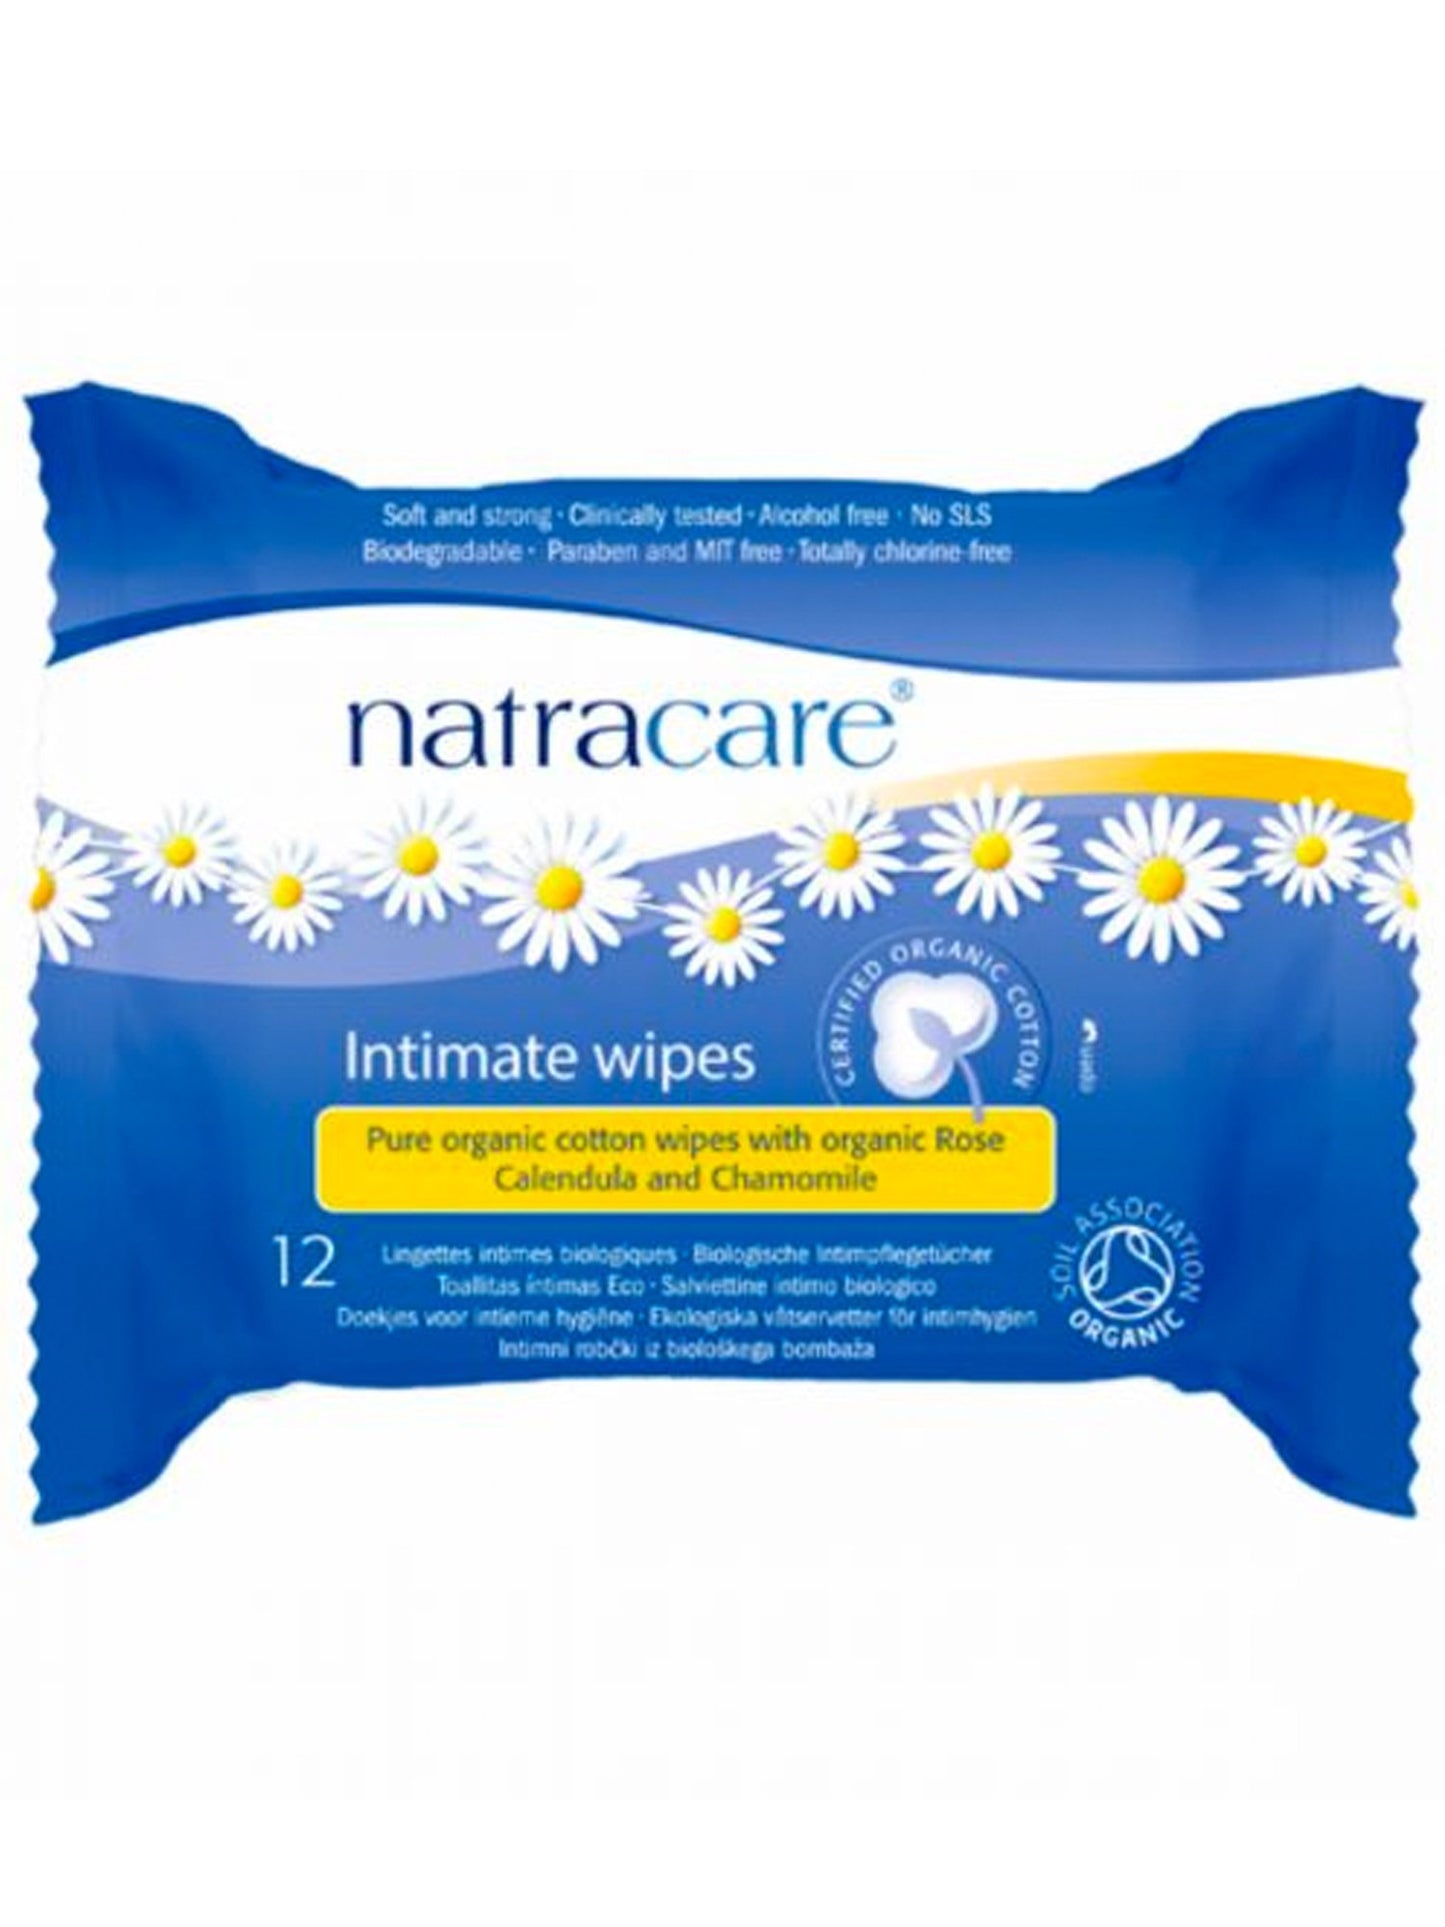 natracare-organic-intimate-wipes-12-pack